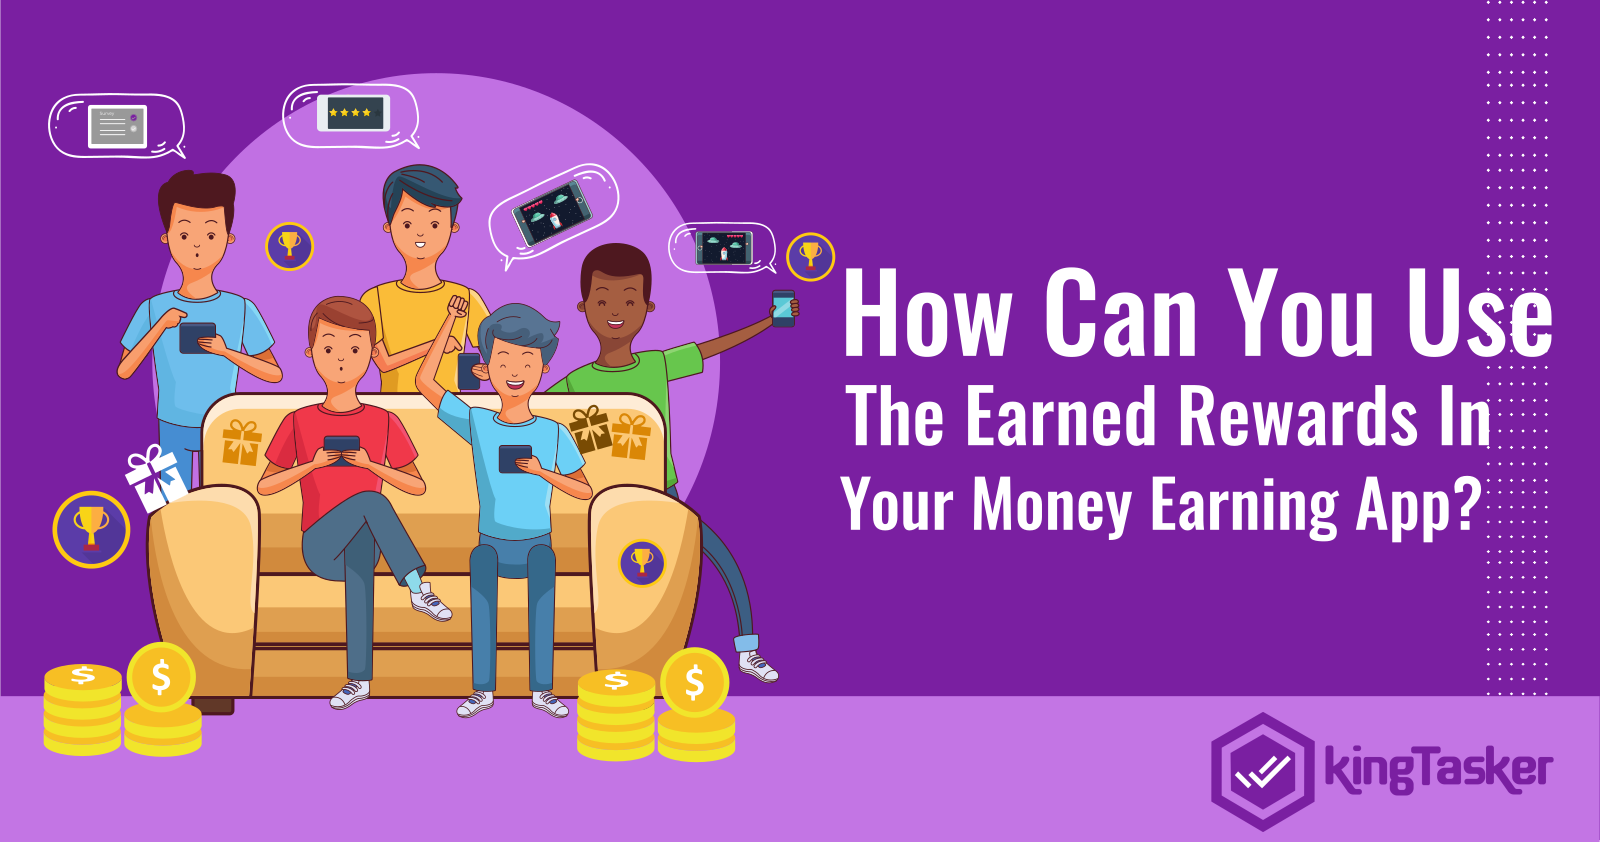 How Can You Use The Earned Rewards In Your Money Earning App?